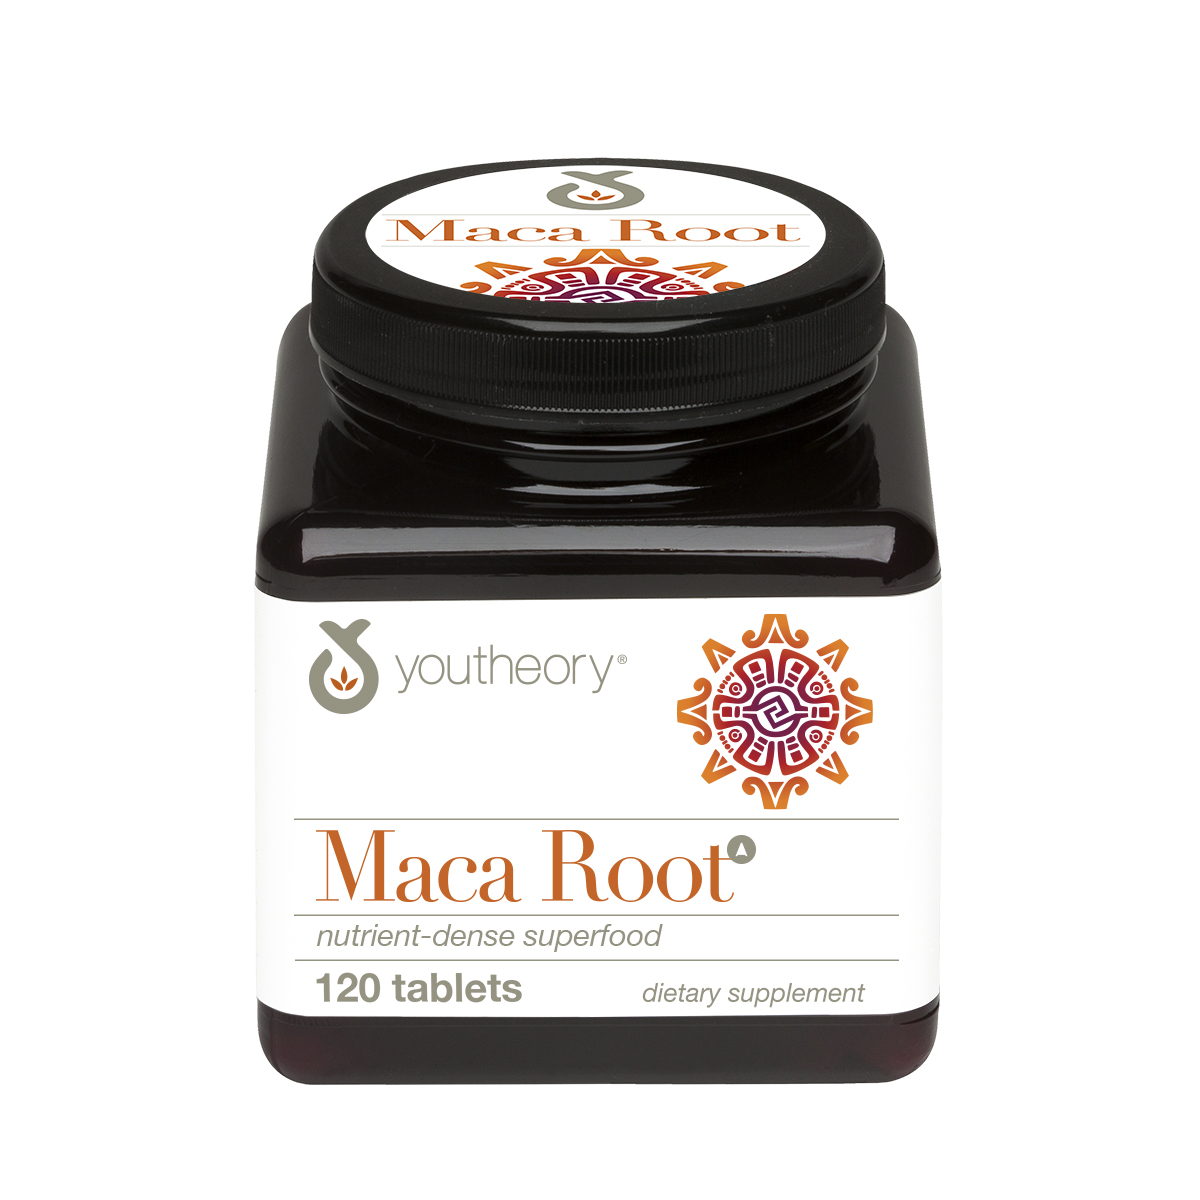 youtheory Maca Root by Nutrawise youtheory